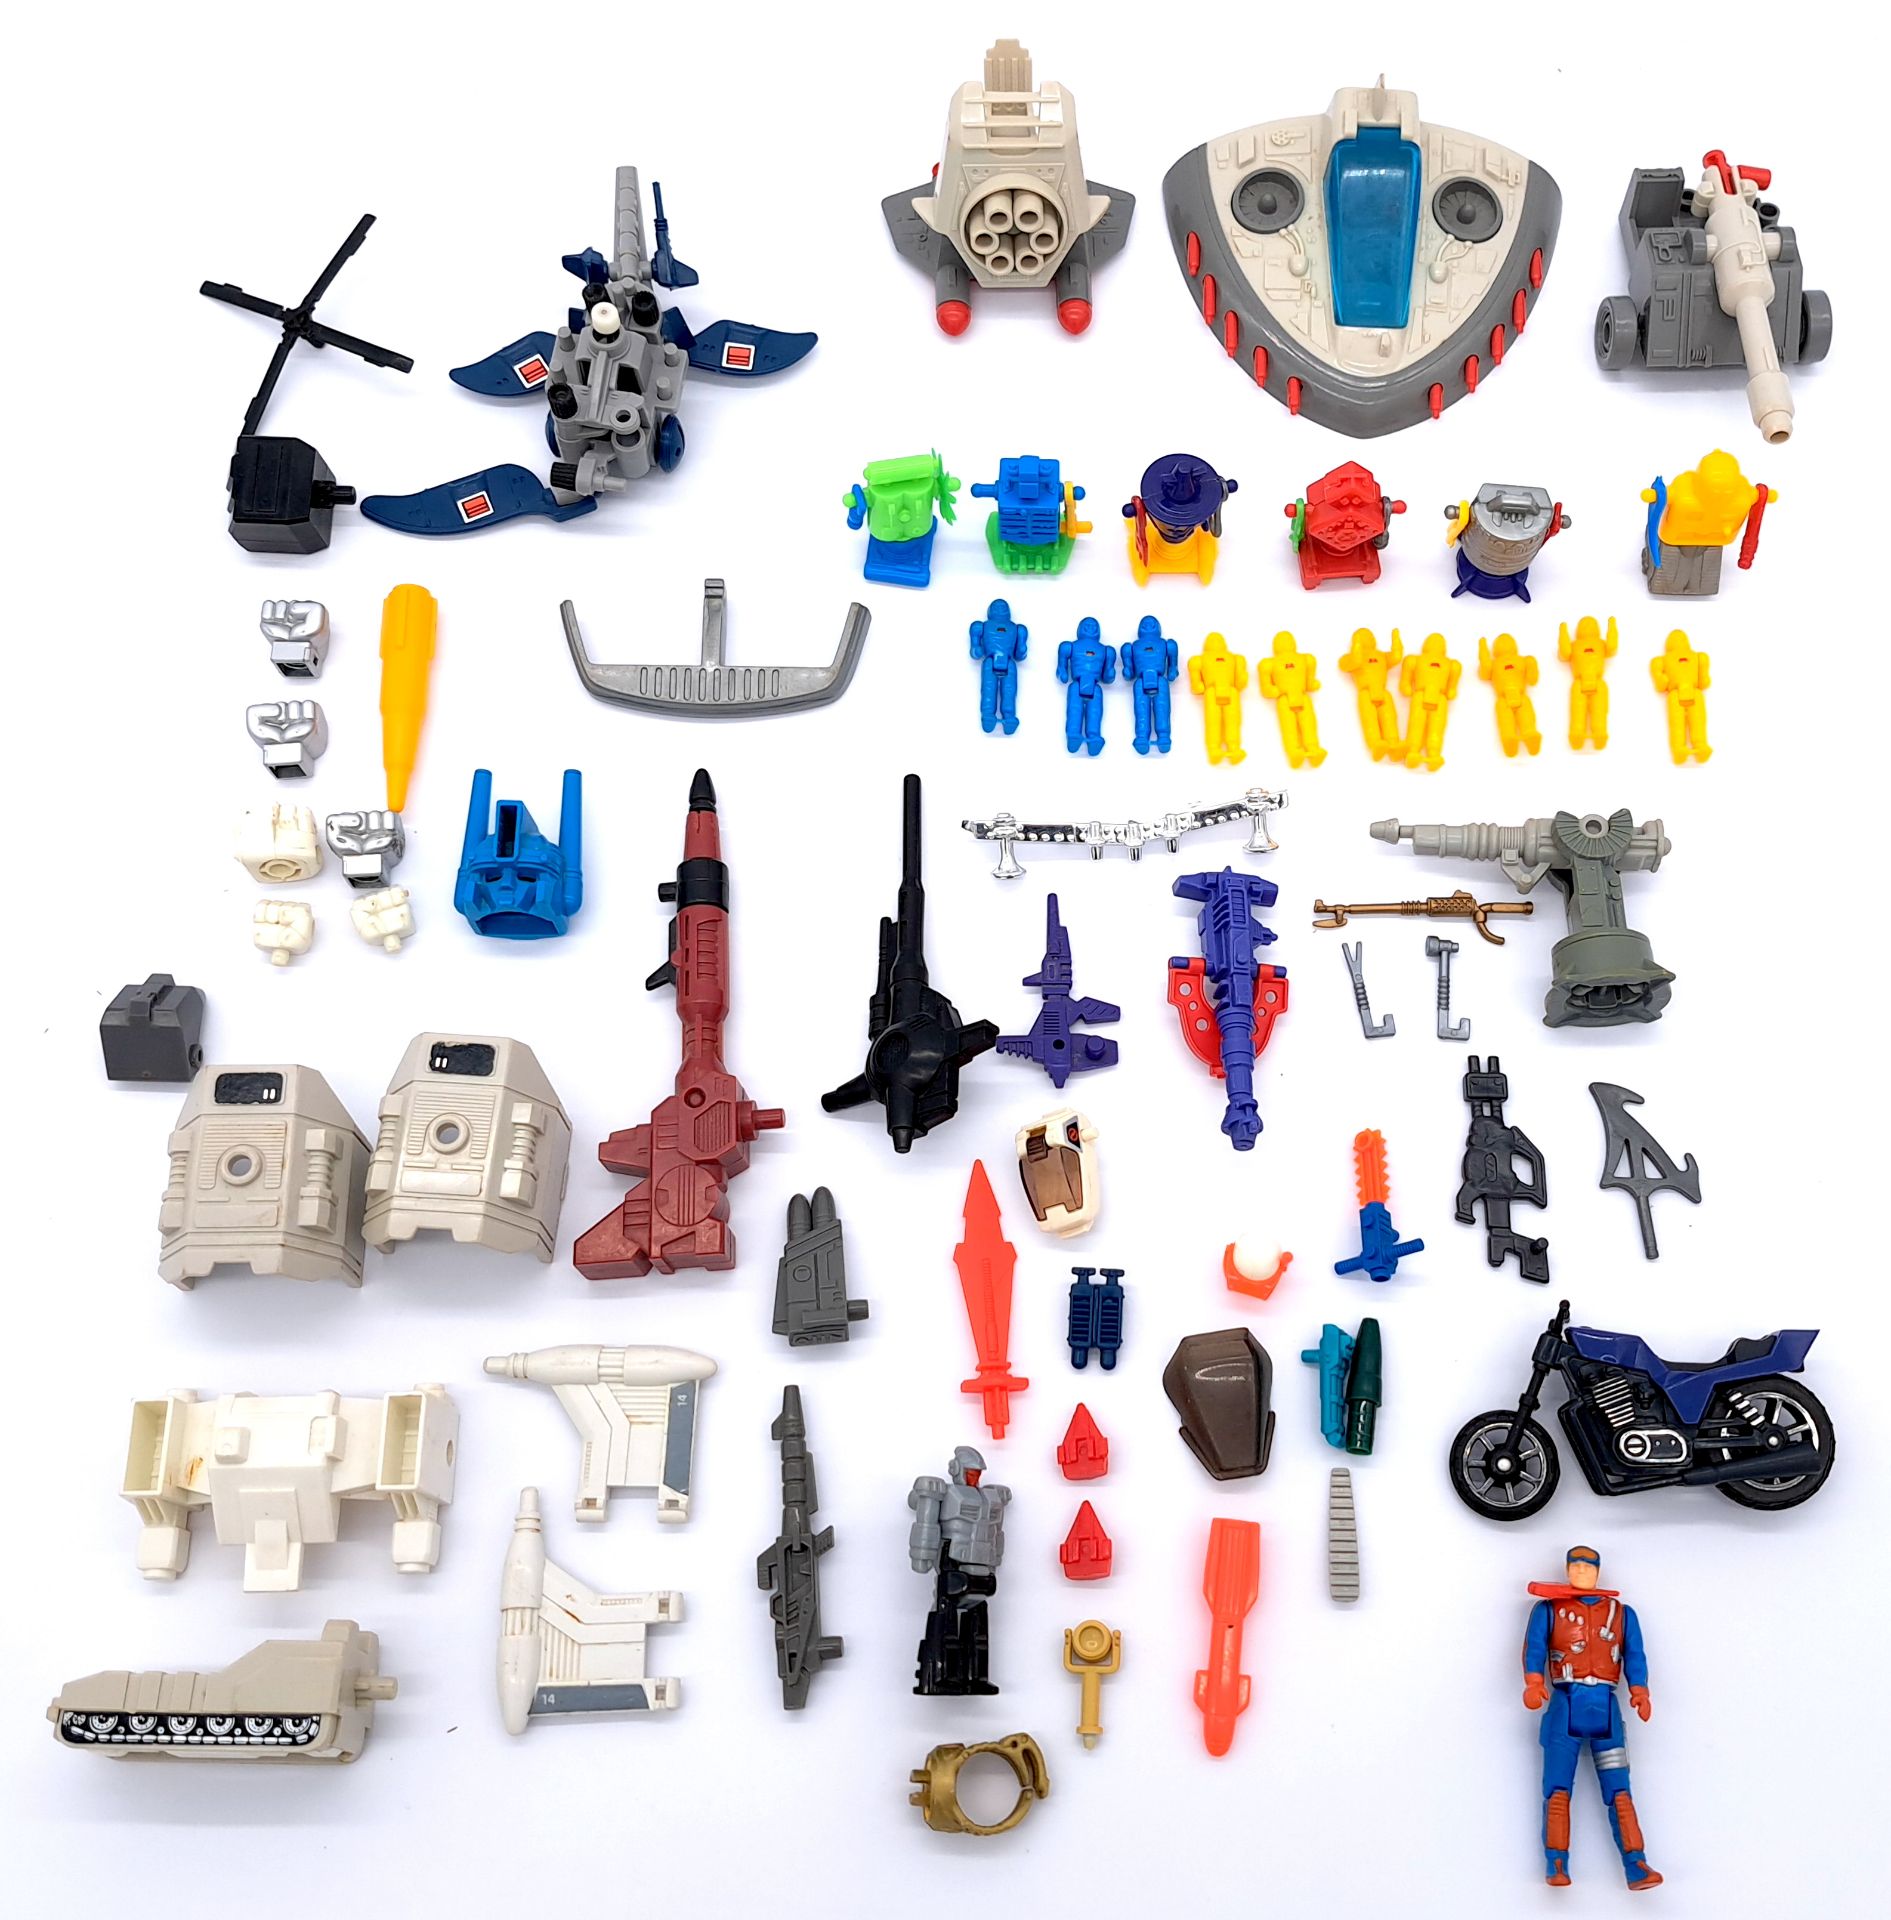 small quantity of action figure parts & accessories